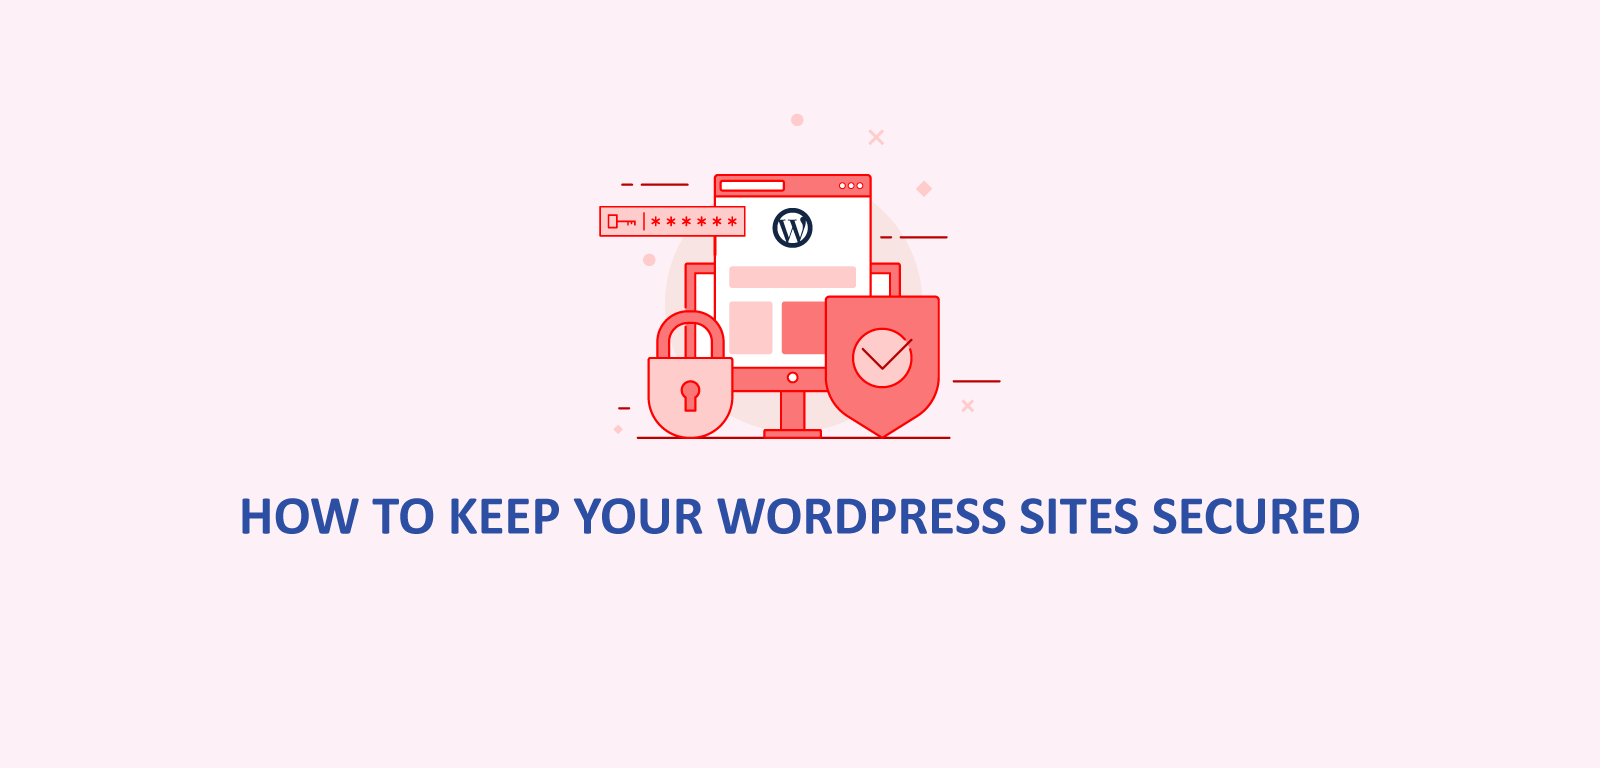 How to keep your WordPress sites secured